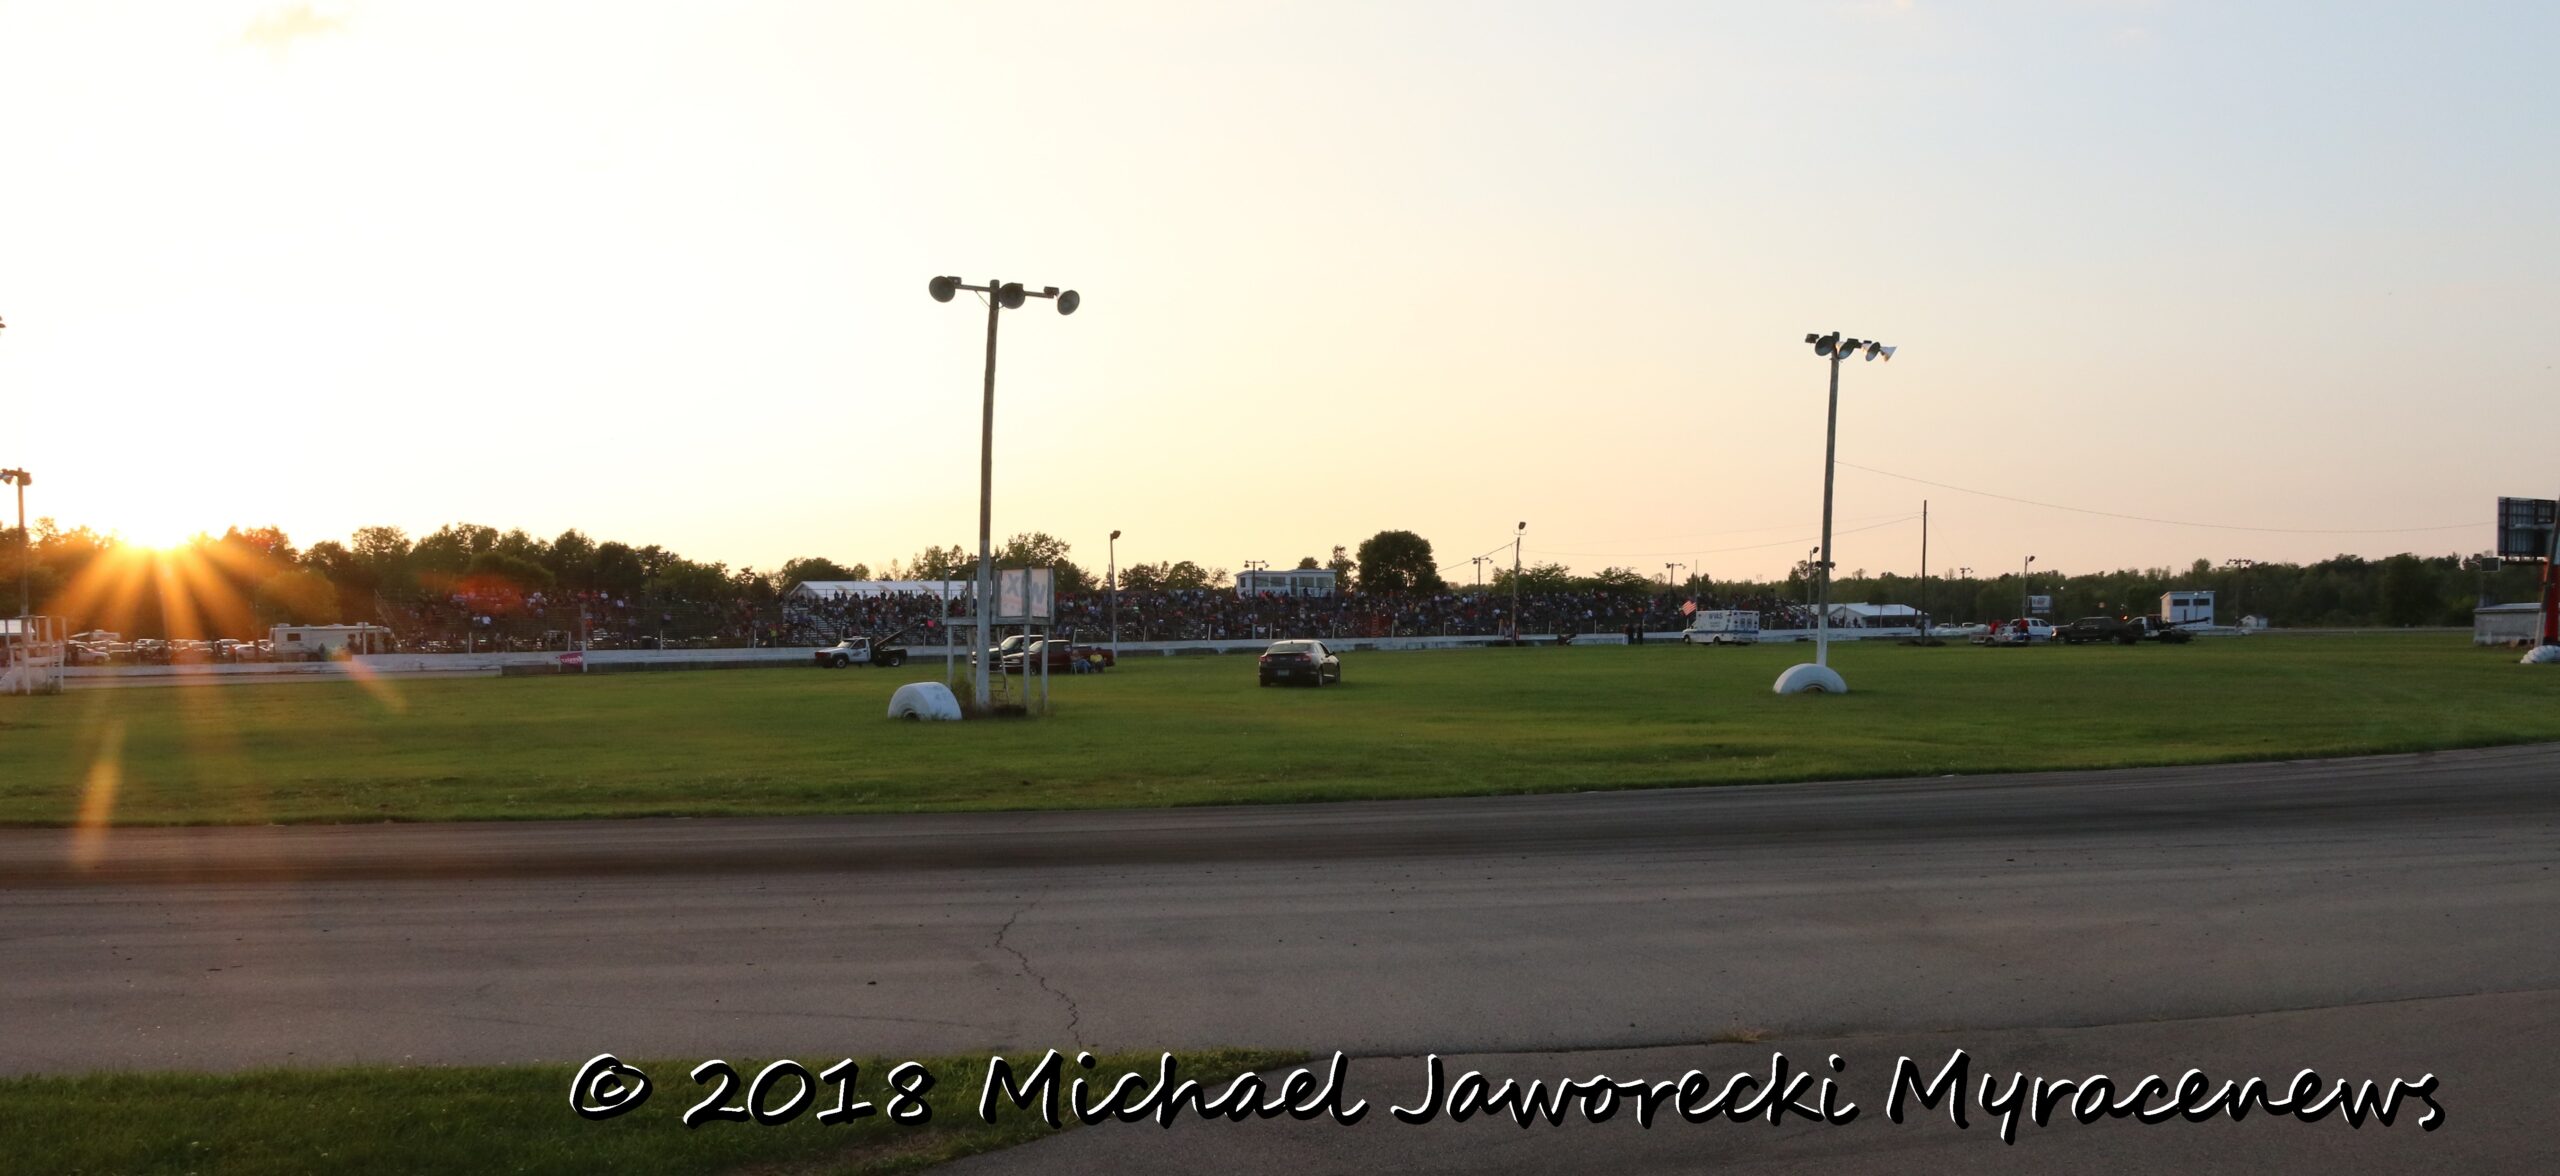 SCHEDULE SET FOR 66th SEASON OF RACING AT SPENCER SPEEDWAY